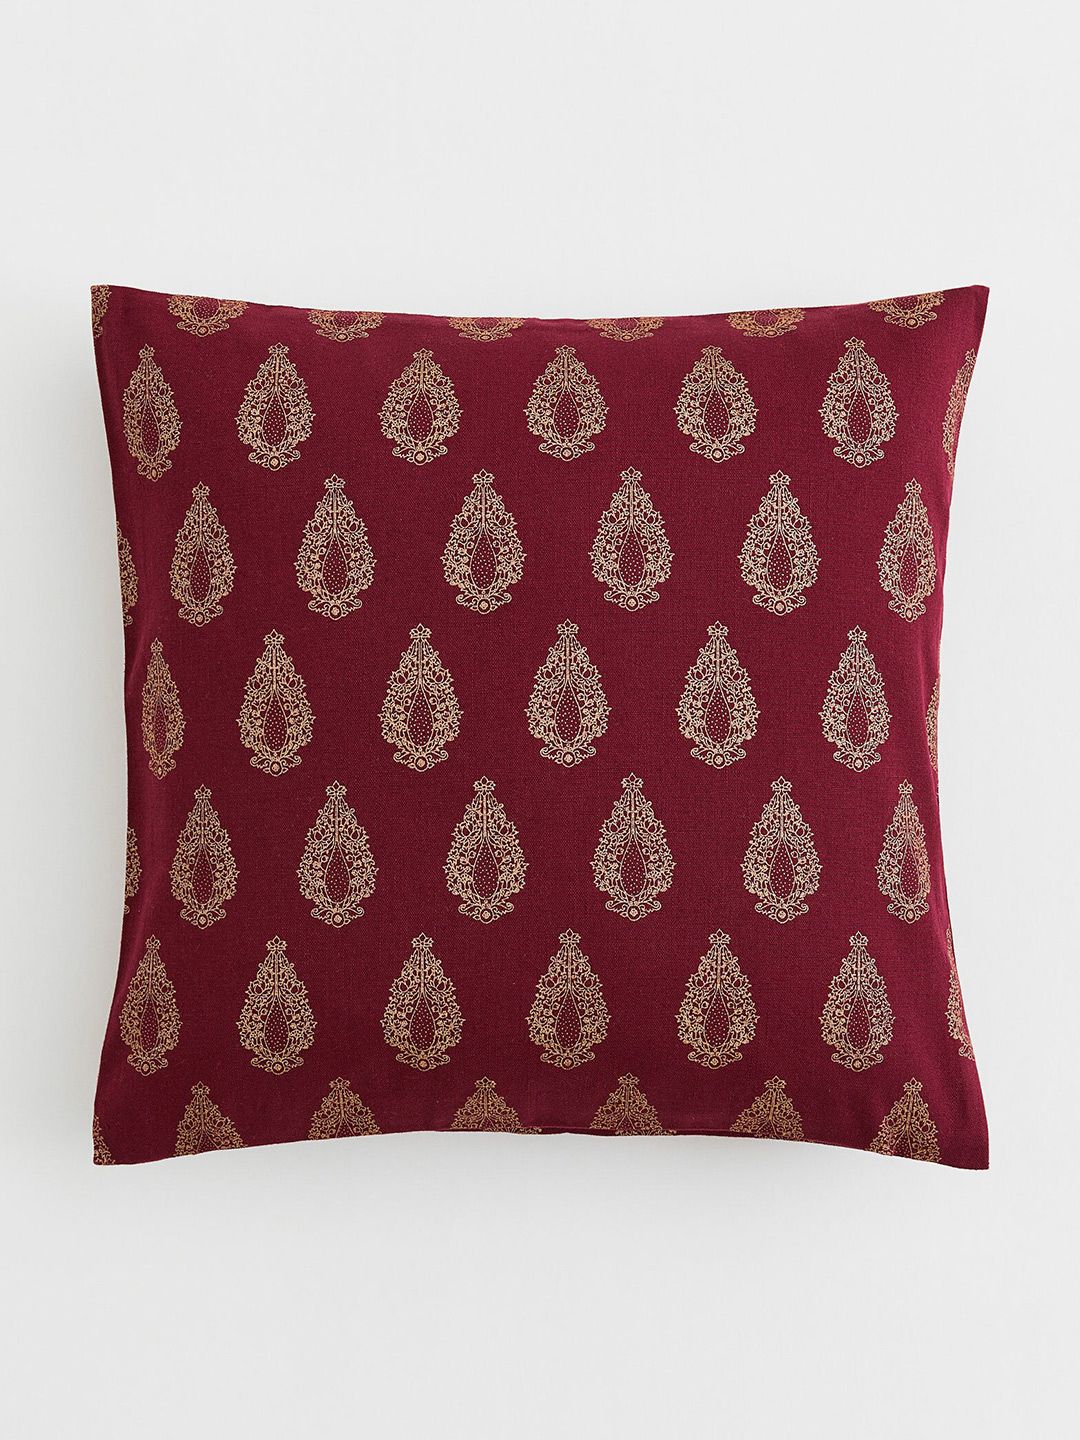 H&M Red & Beige Patterned Cushion Cover Price in India